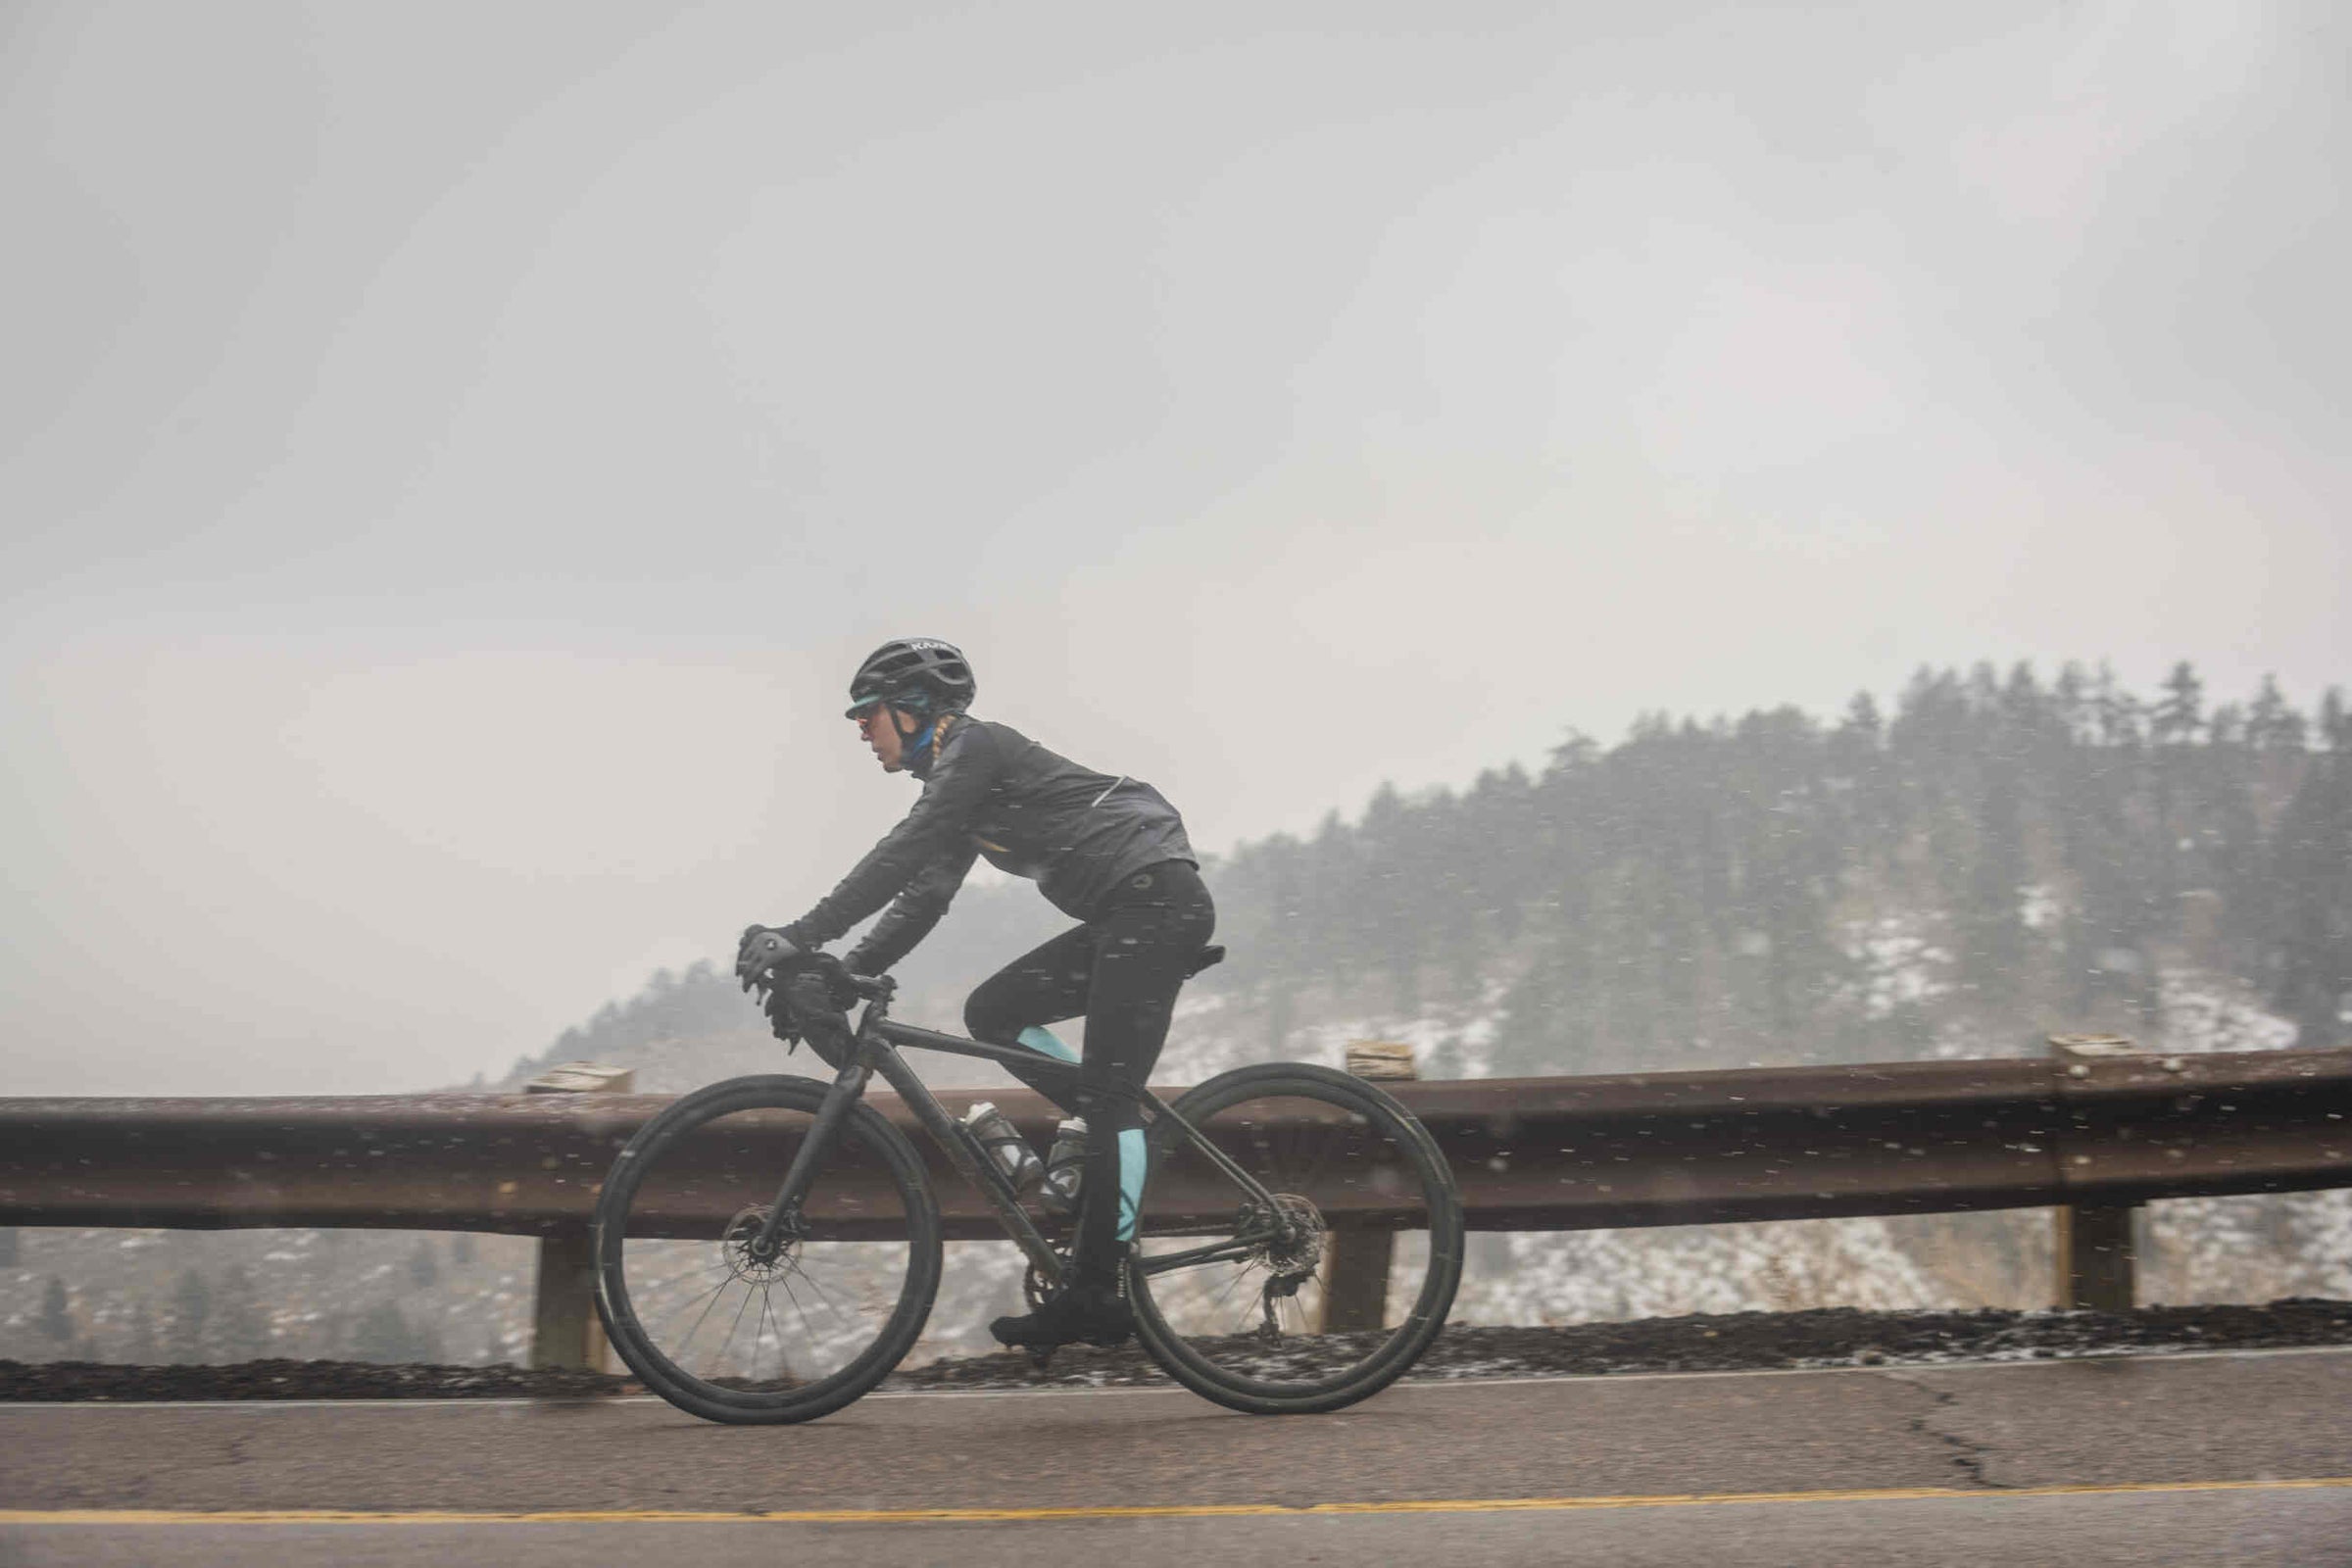 Winter Cycling Clothing for Cold Weather